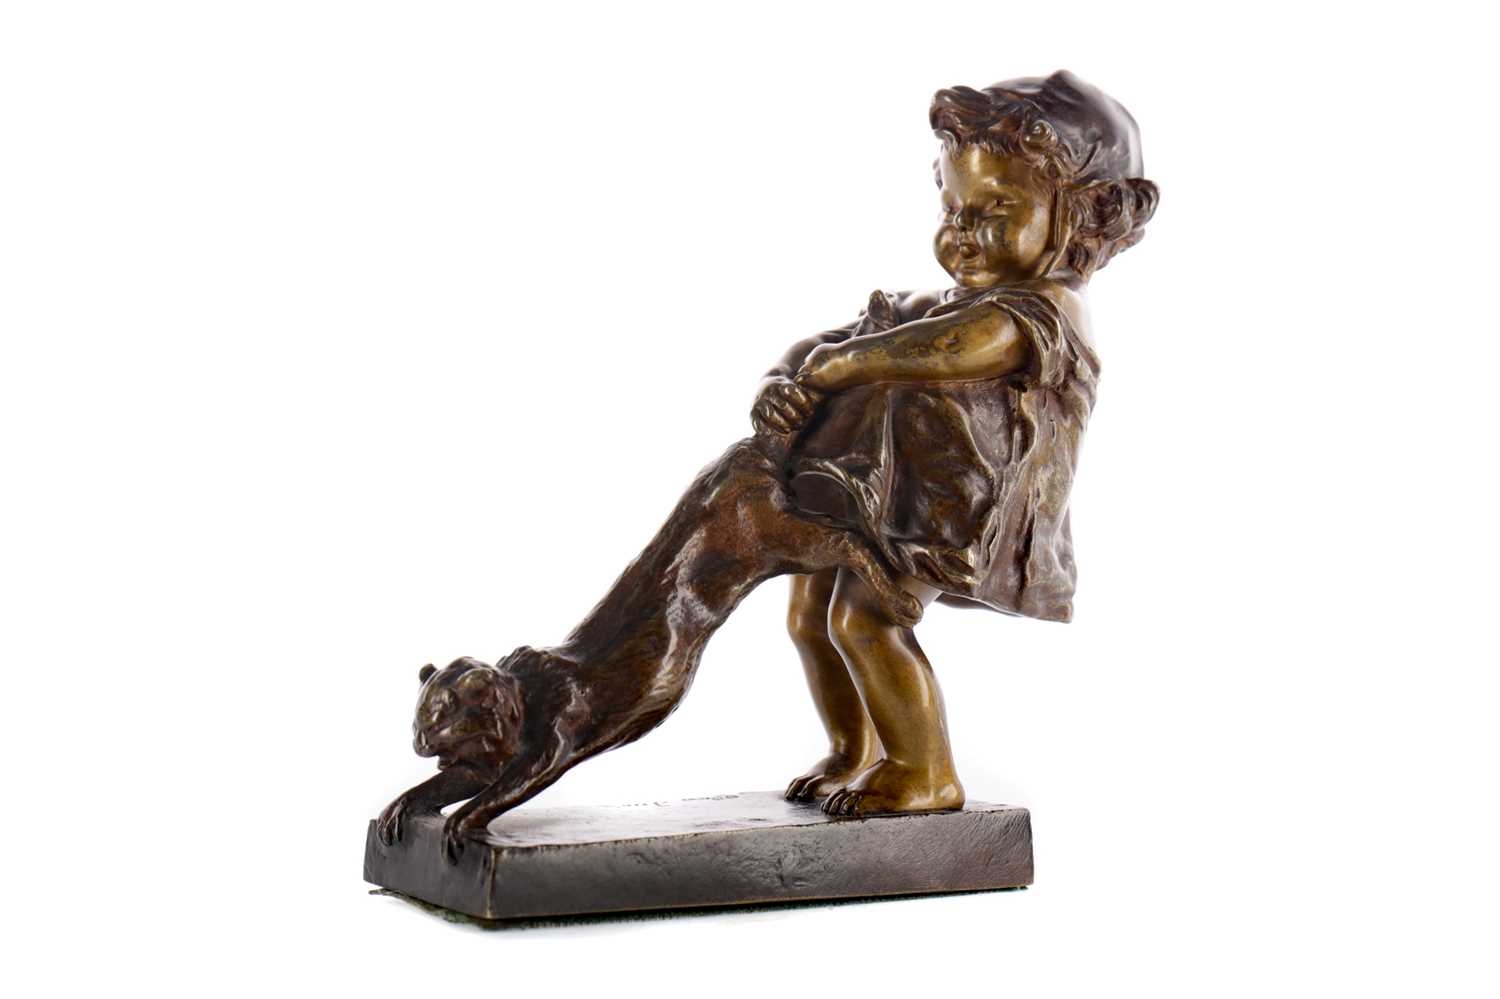 Lot 1686 - A COLD PAINTED BRONZE FIGURE GROUP OF A GIRL PULLING A CAT, BY JUAN CLARA (SPANISH, 1875-1958